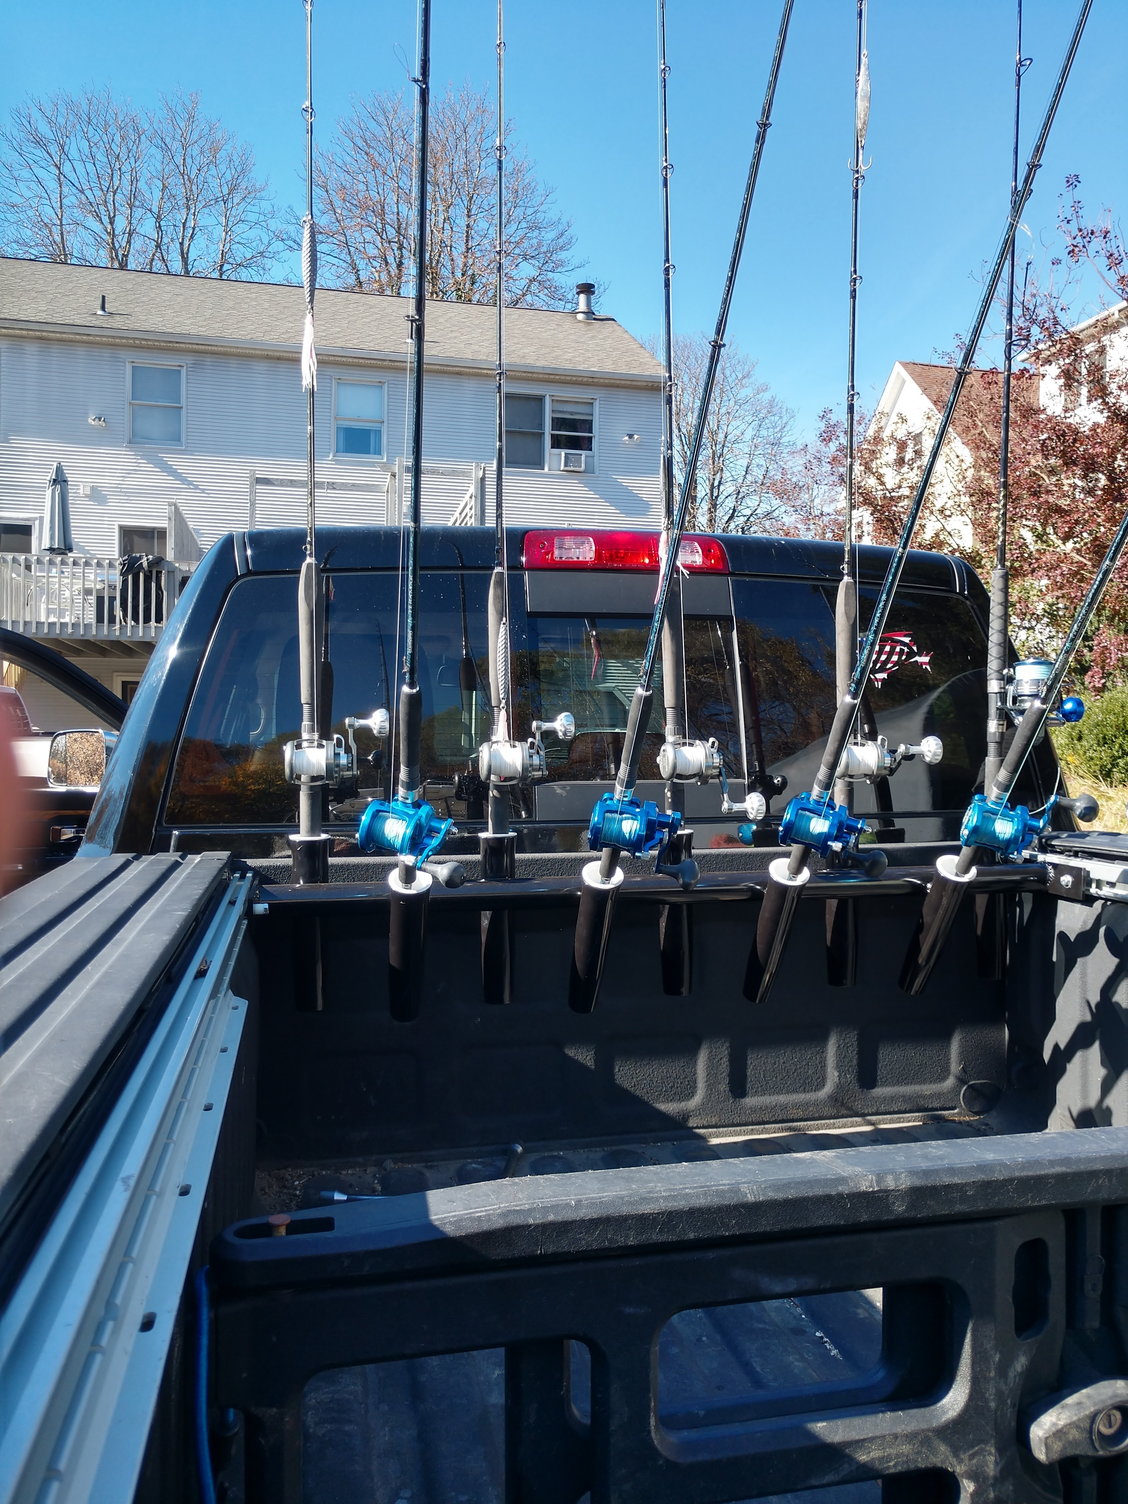 DIY: Custom Truck Bed Rod Holder - The Hull Truth - Boating and Fishing  Forum